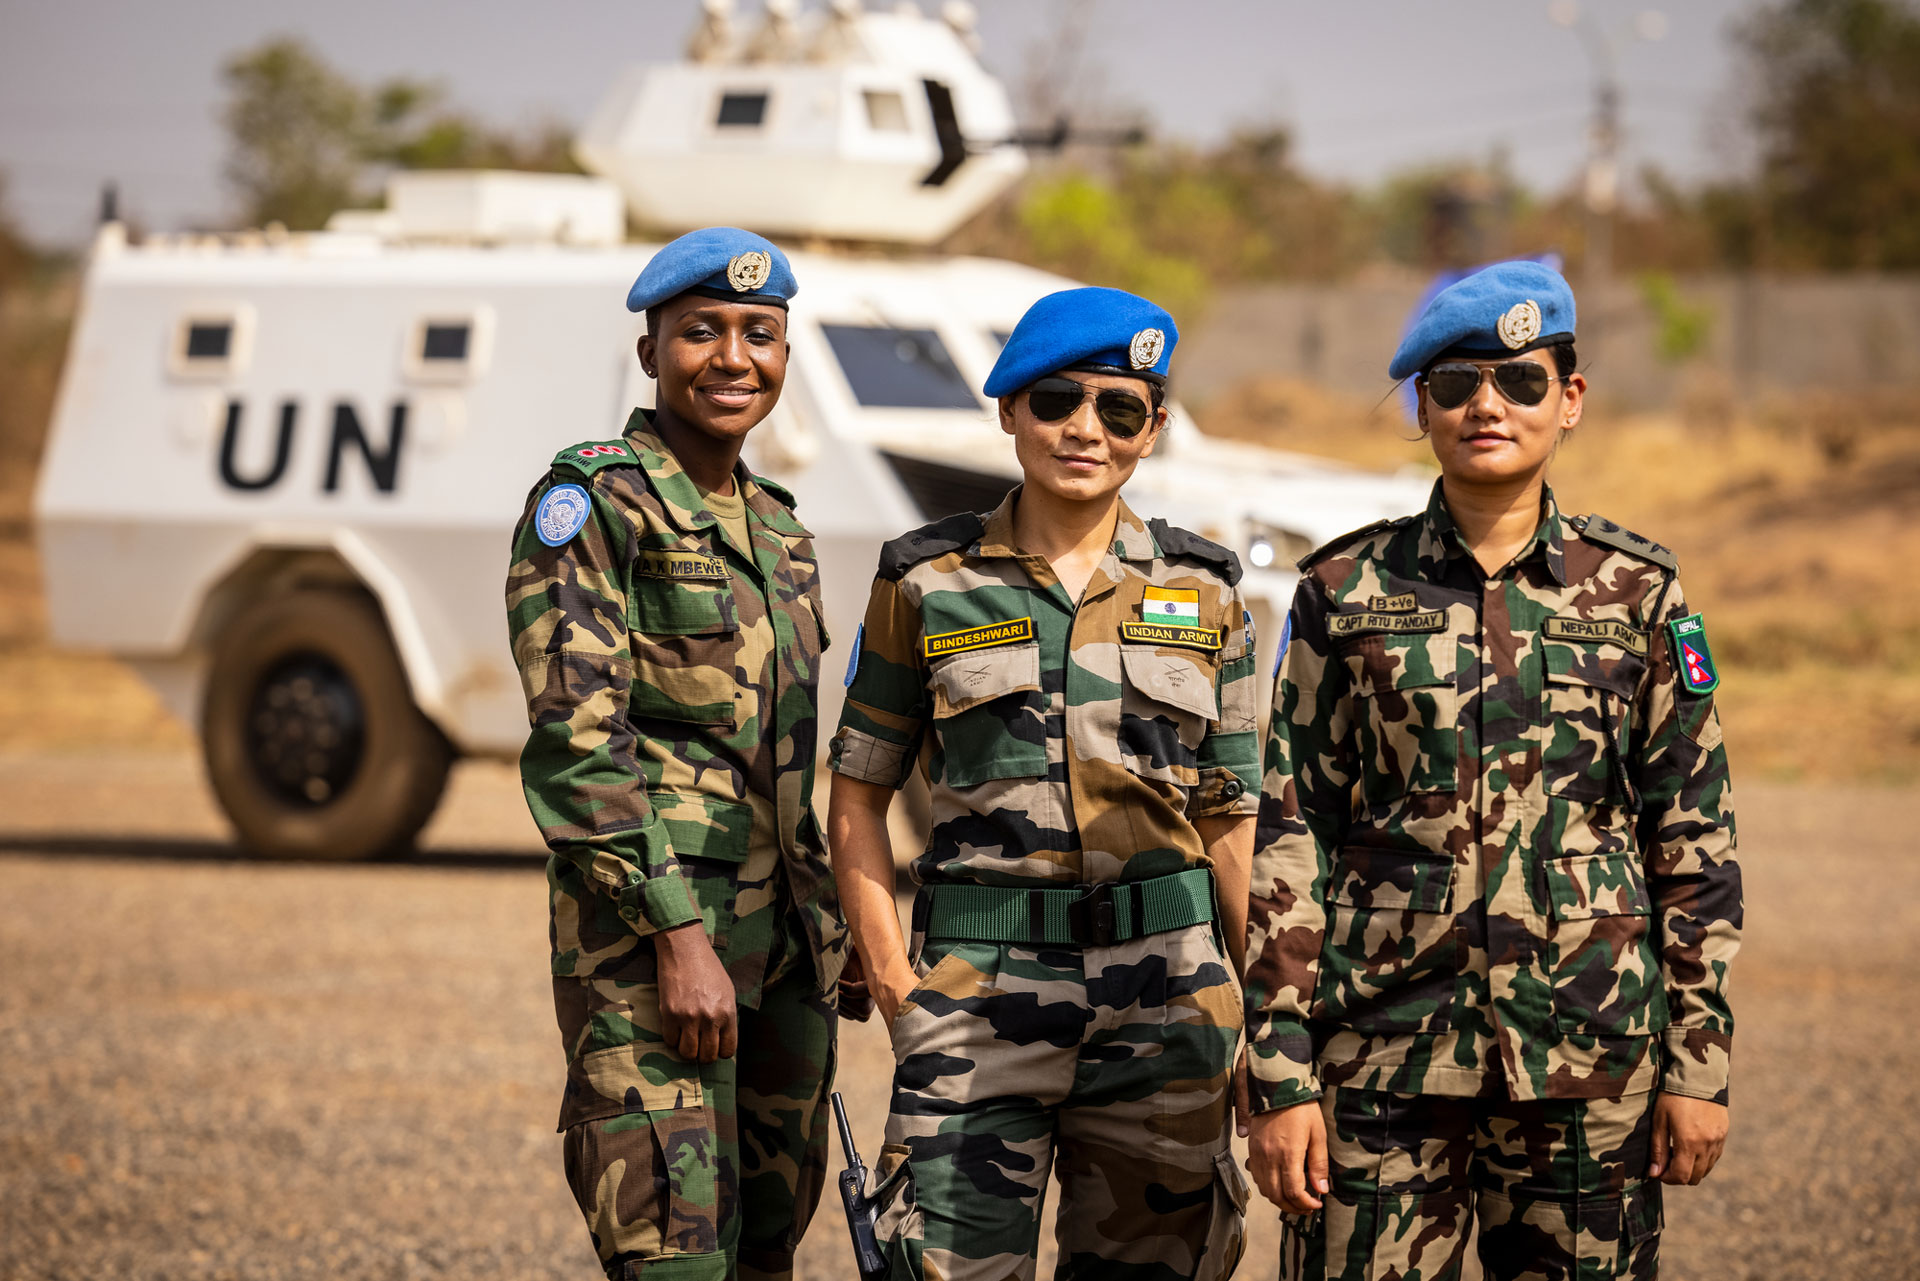 <p id="yui_3_16_0_1_1647614642066_56677"><sub>Captain Atupele Mbewe from Malawi, Major Bindeshwari from India, and Captain Ritu Pandey from Nepal, pose for a photo at the United Nations Camp in Juba. </sub></p>